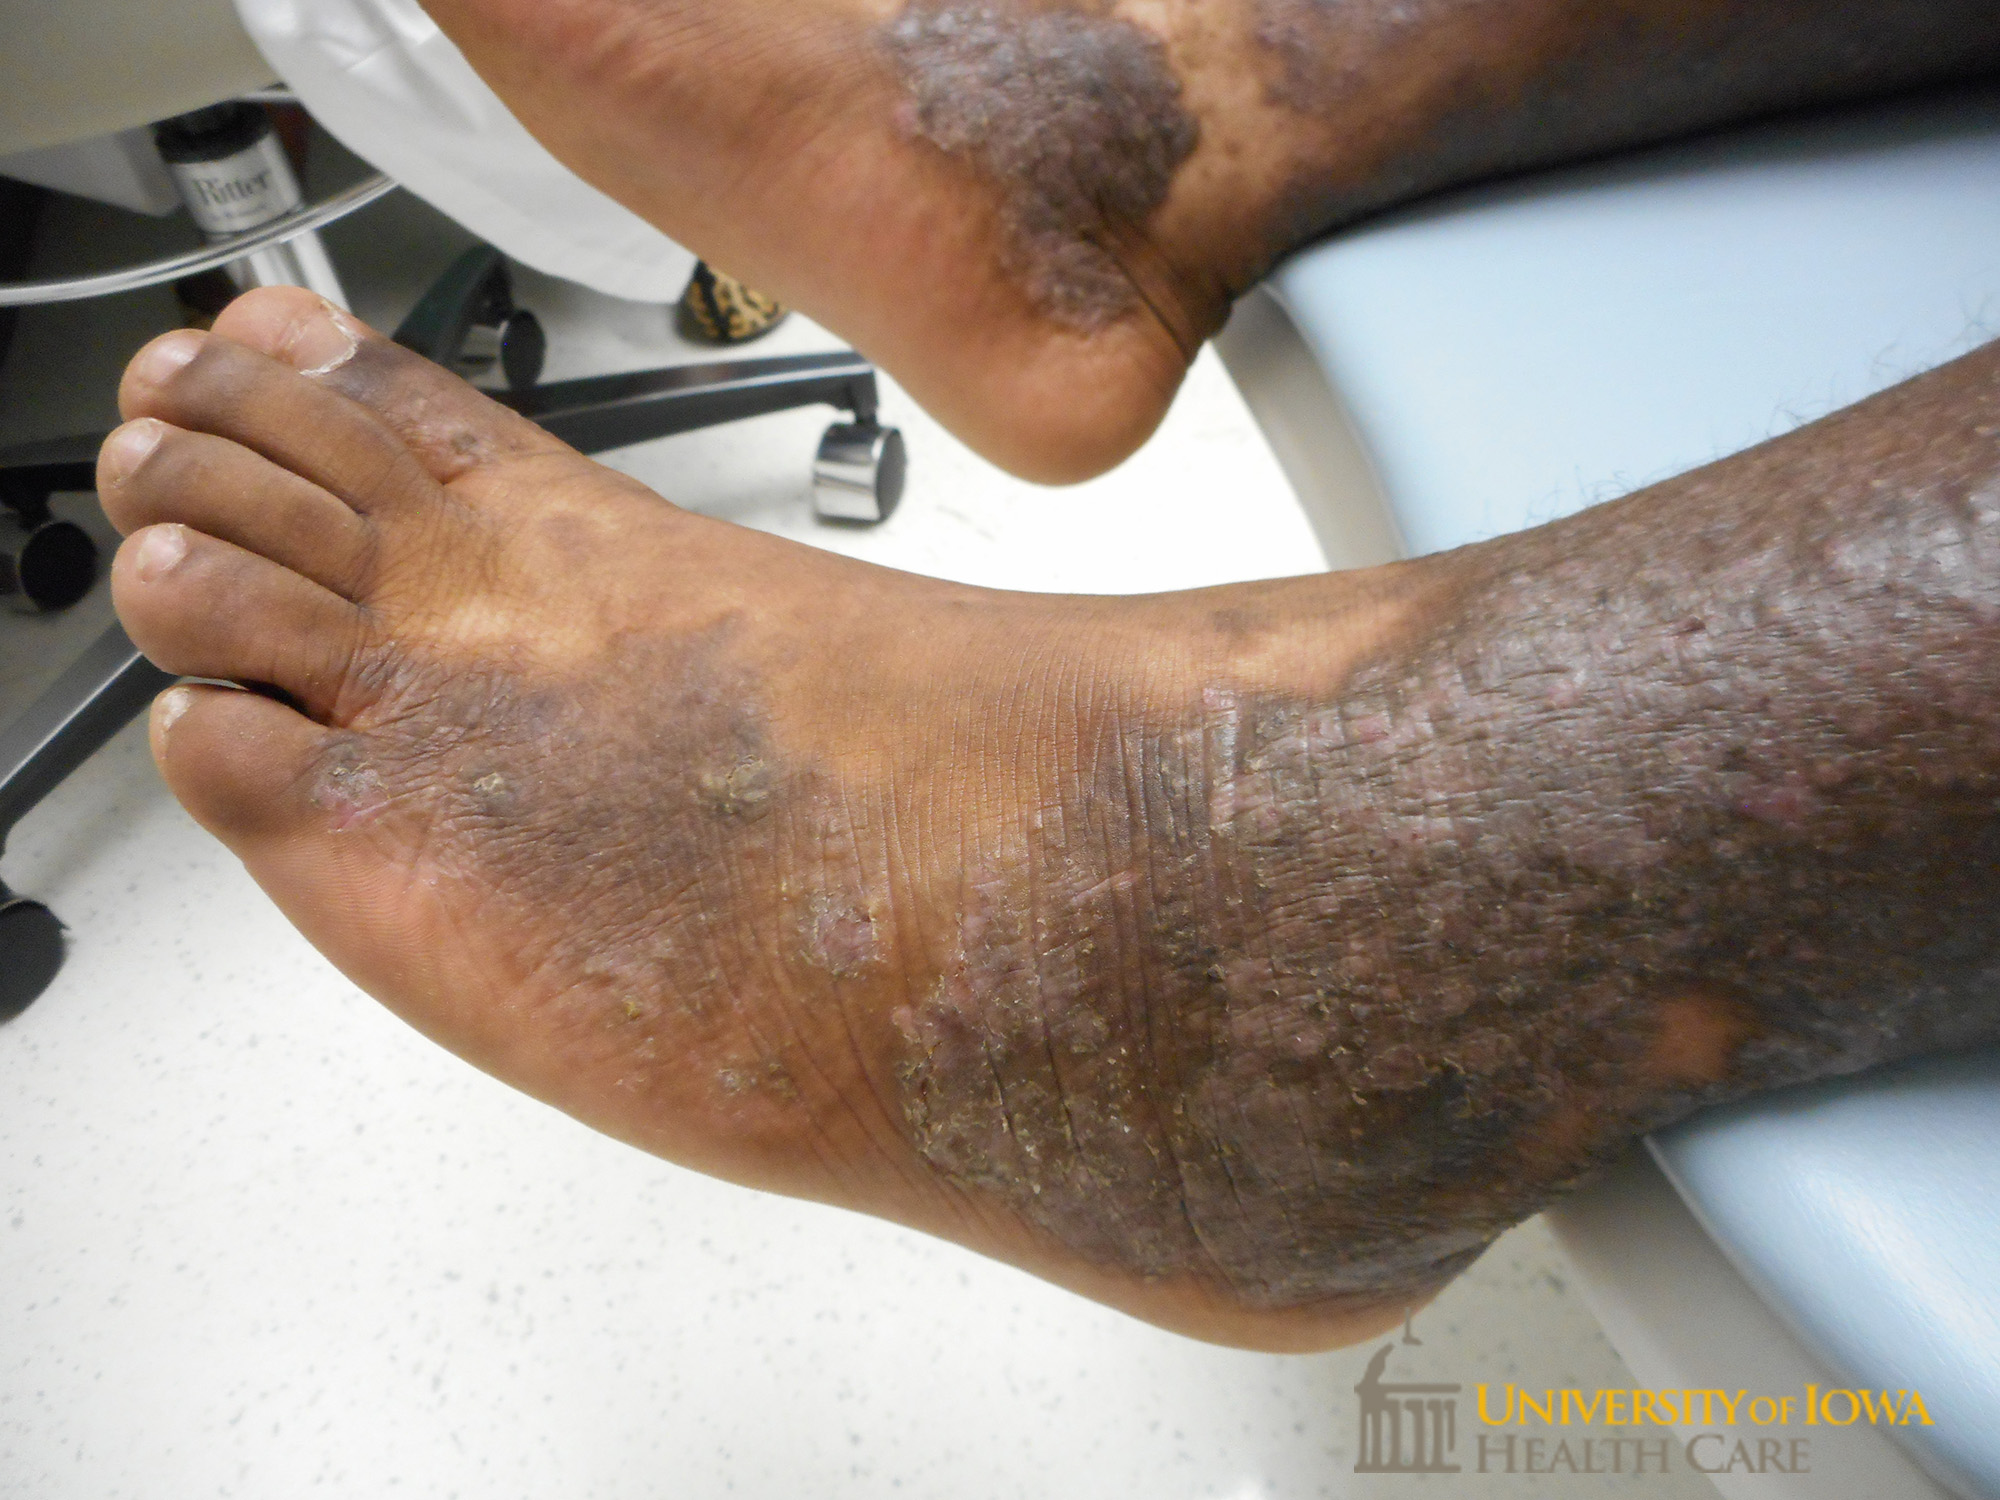 Hyperpigmented to erythematous lichenified scaly plaques on the dorsal feet and legs. (click images for higher resolution).